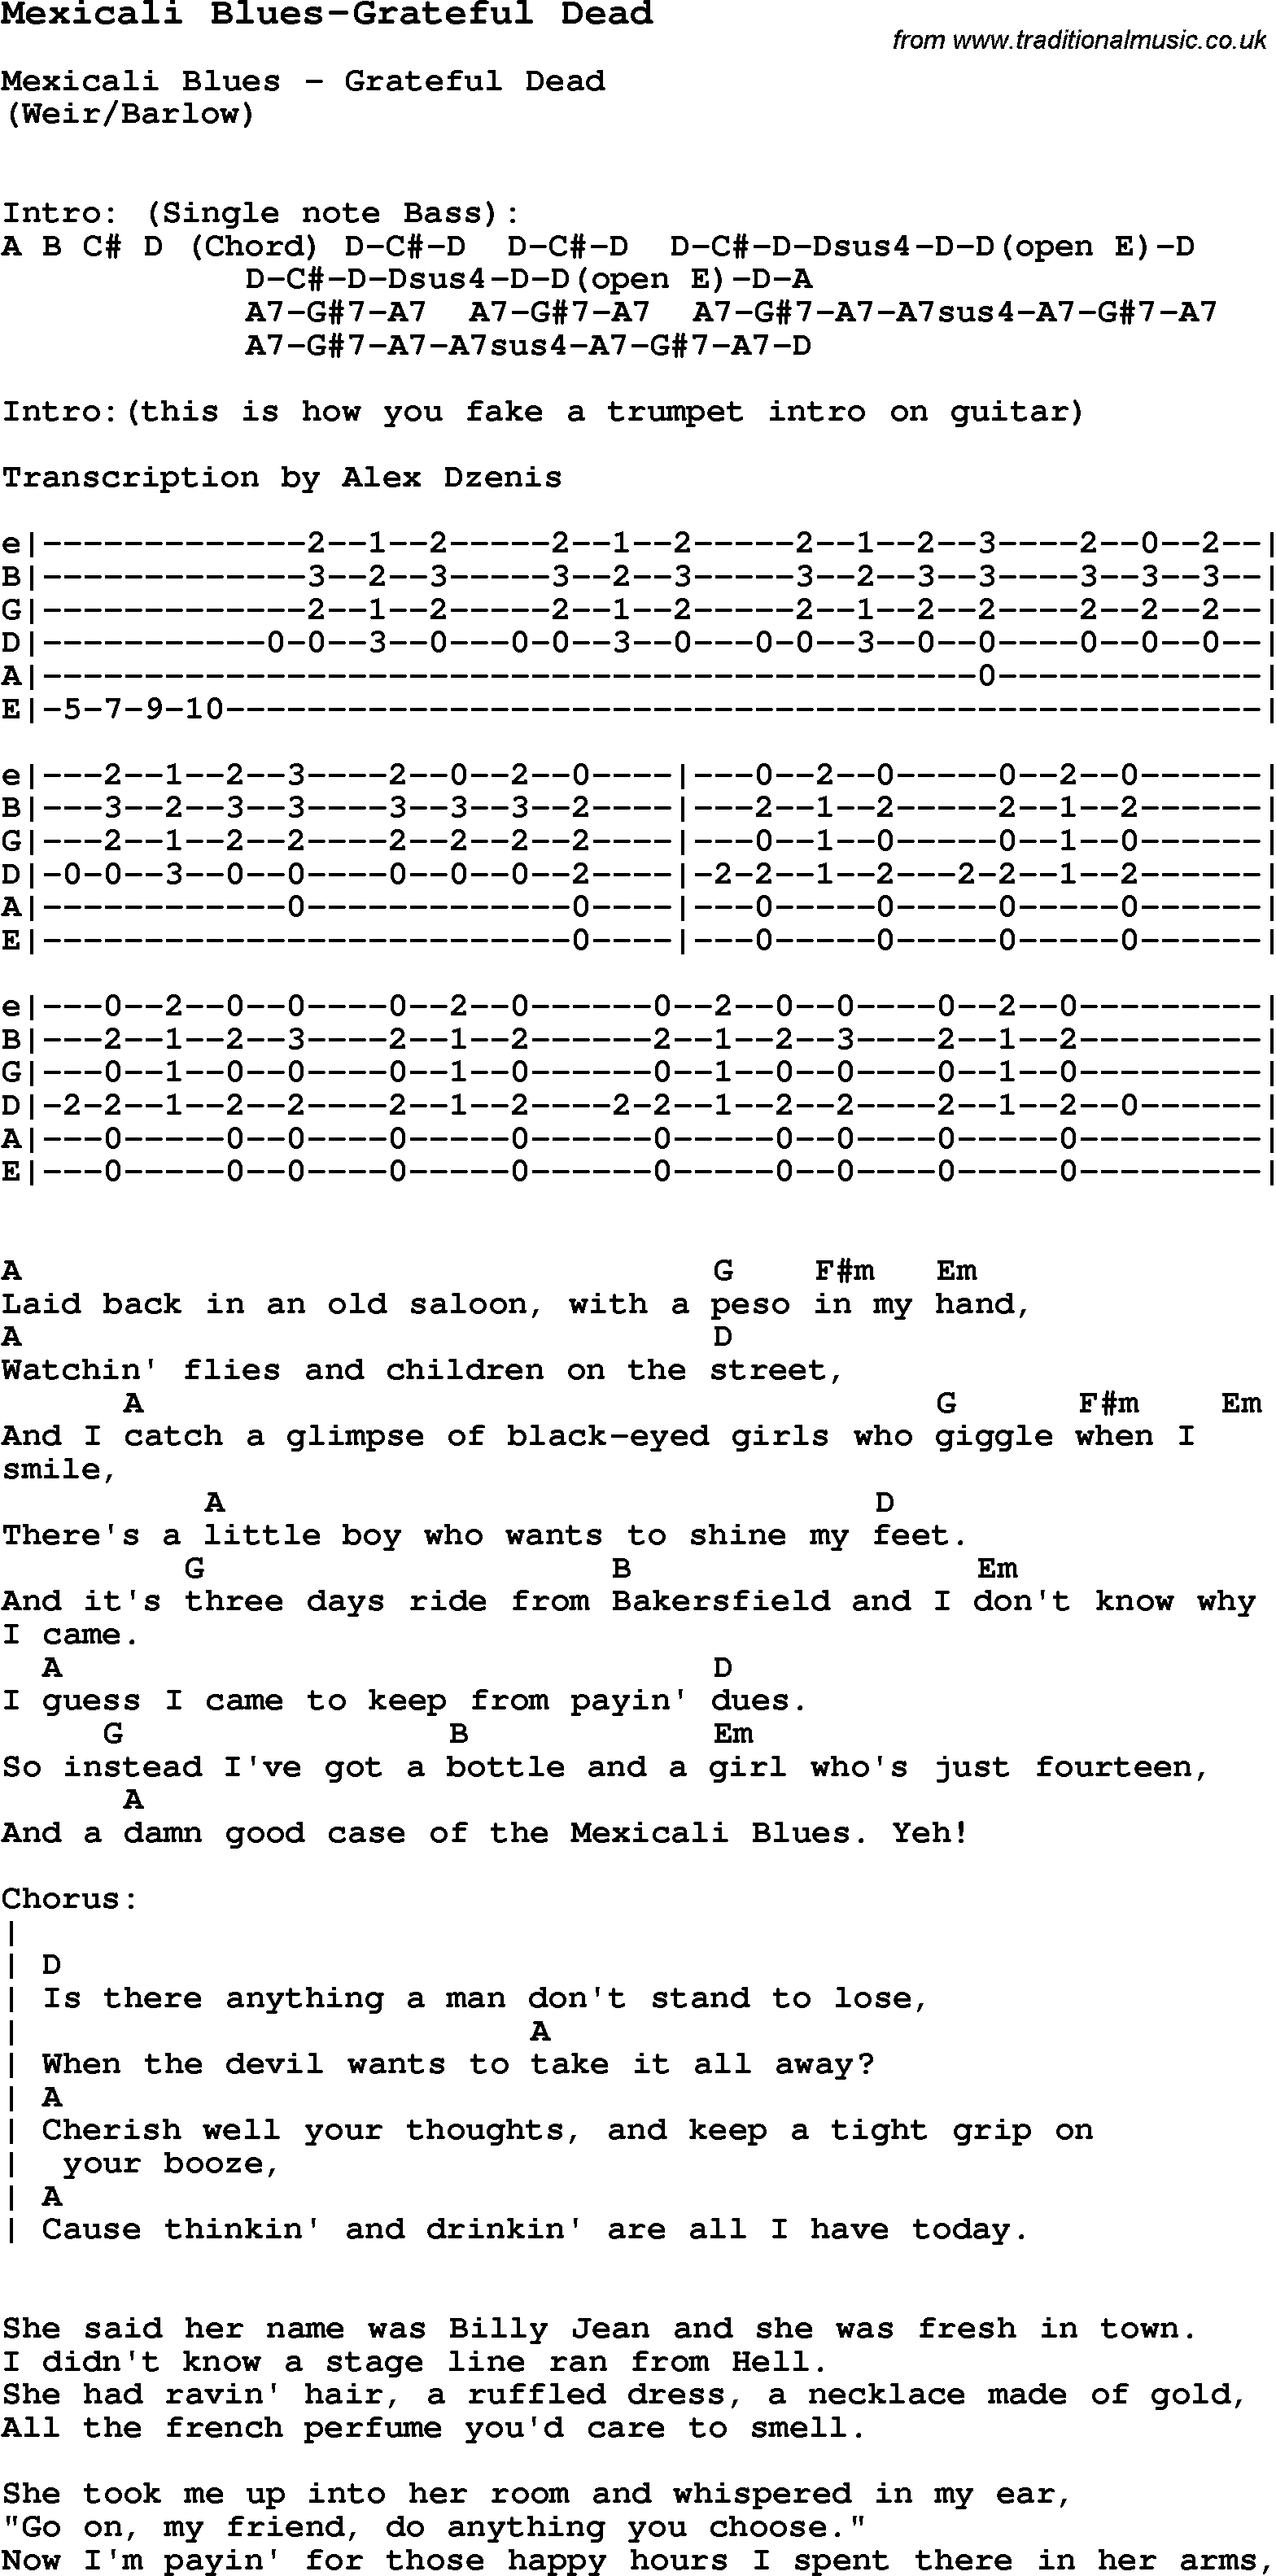 Blues Guitar Song, lyrics, chords, tablature, playing hints for Mexicali Blues-Grateful Dead